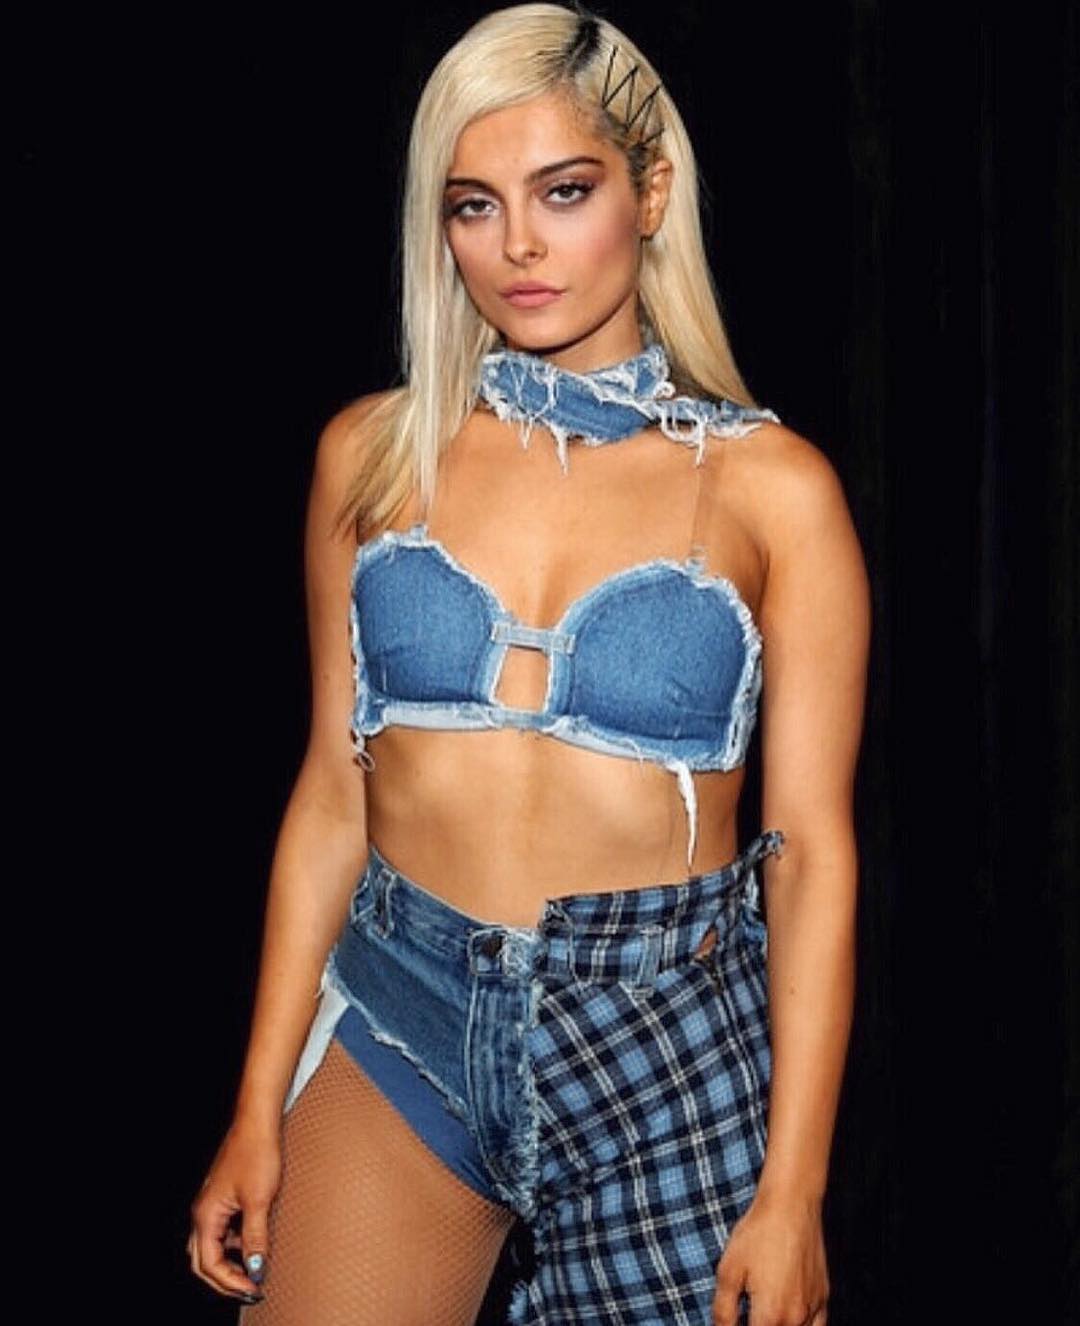 The Hottest Pictures Of Bebe Rexha.